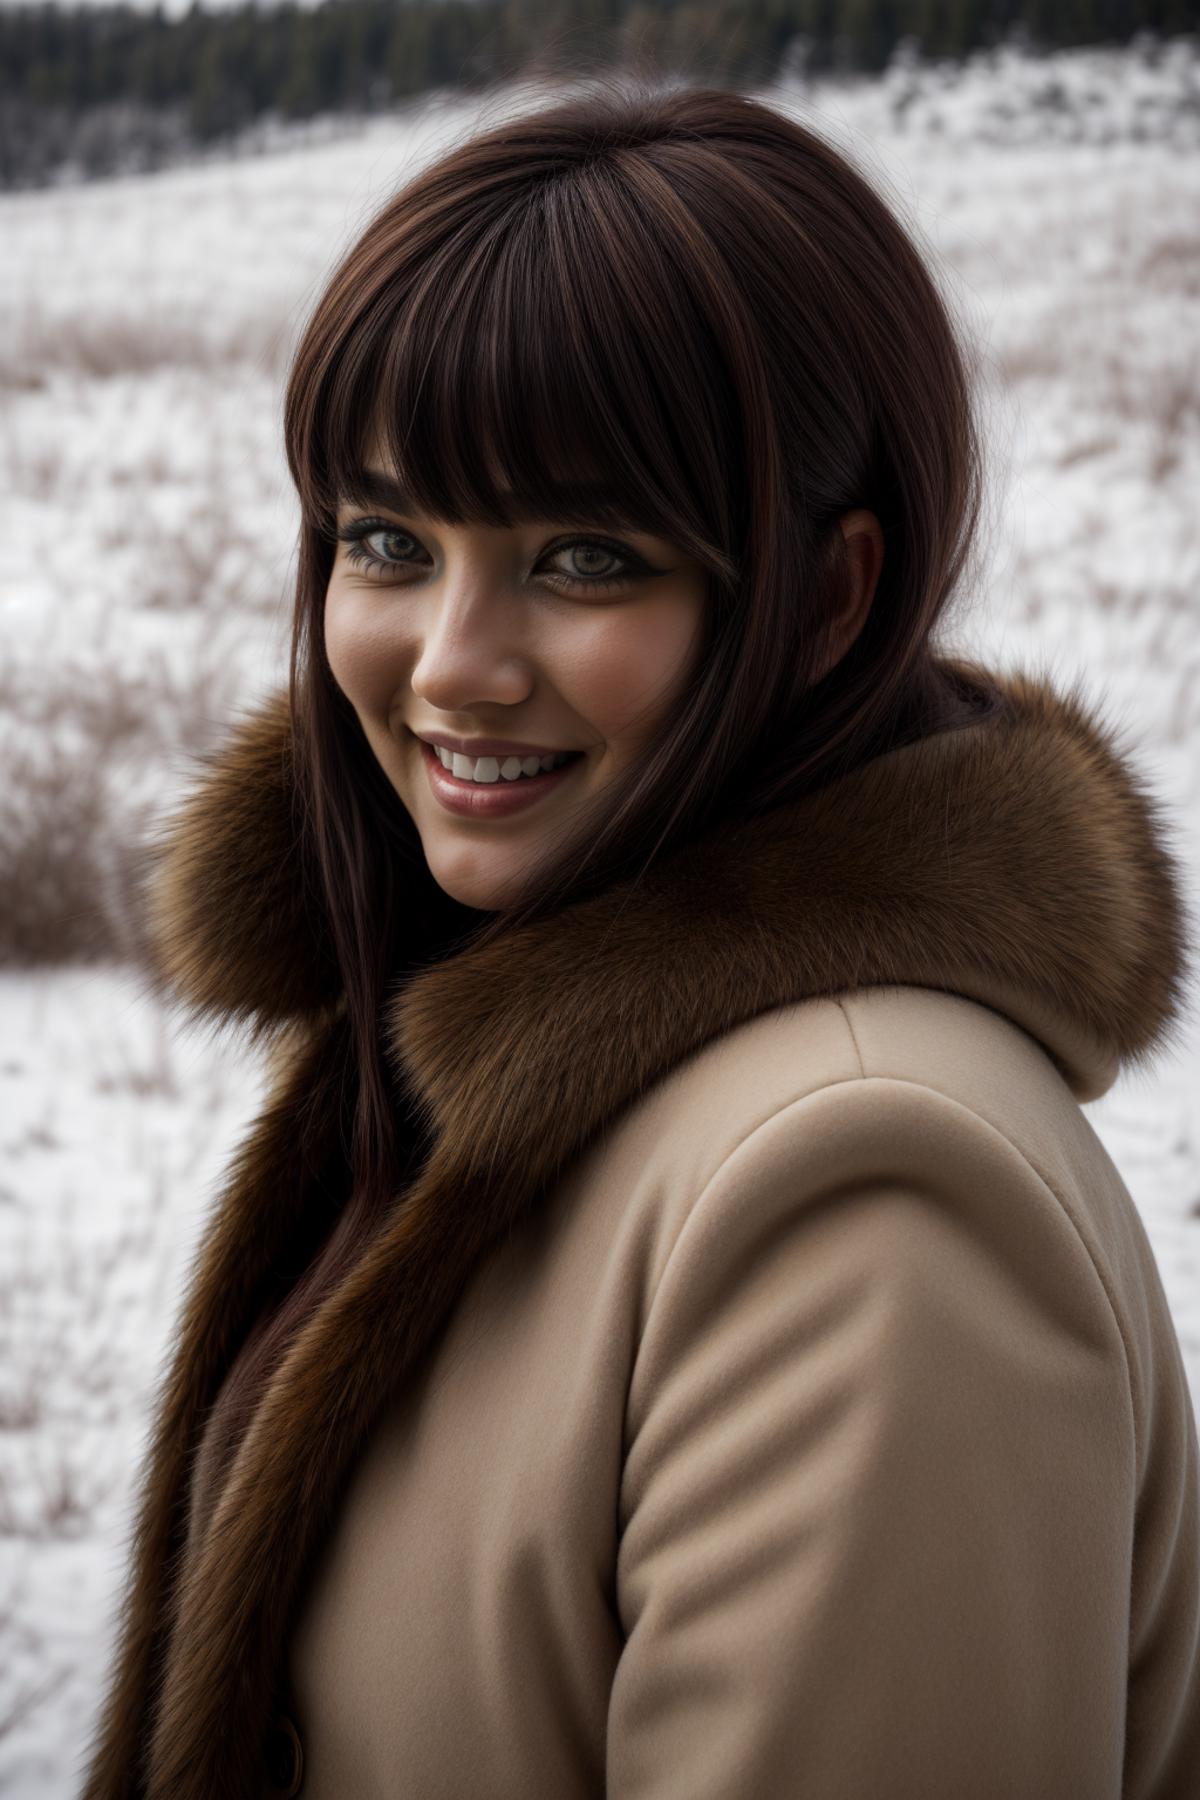 Smiling Woman with Long Brown Hair and Tan Fur Collar Wearing a Beige Coat.